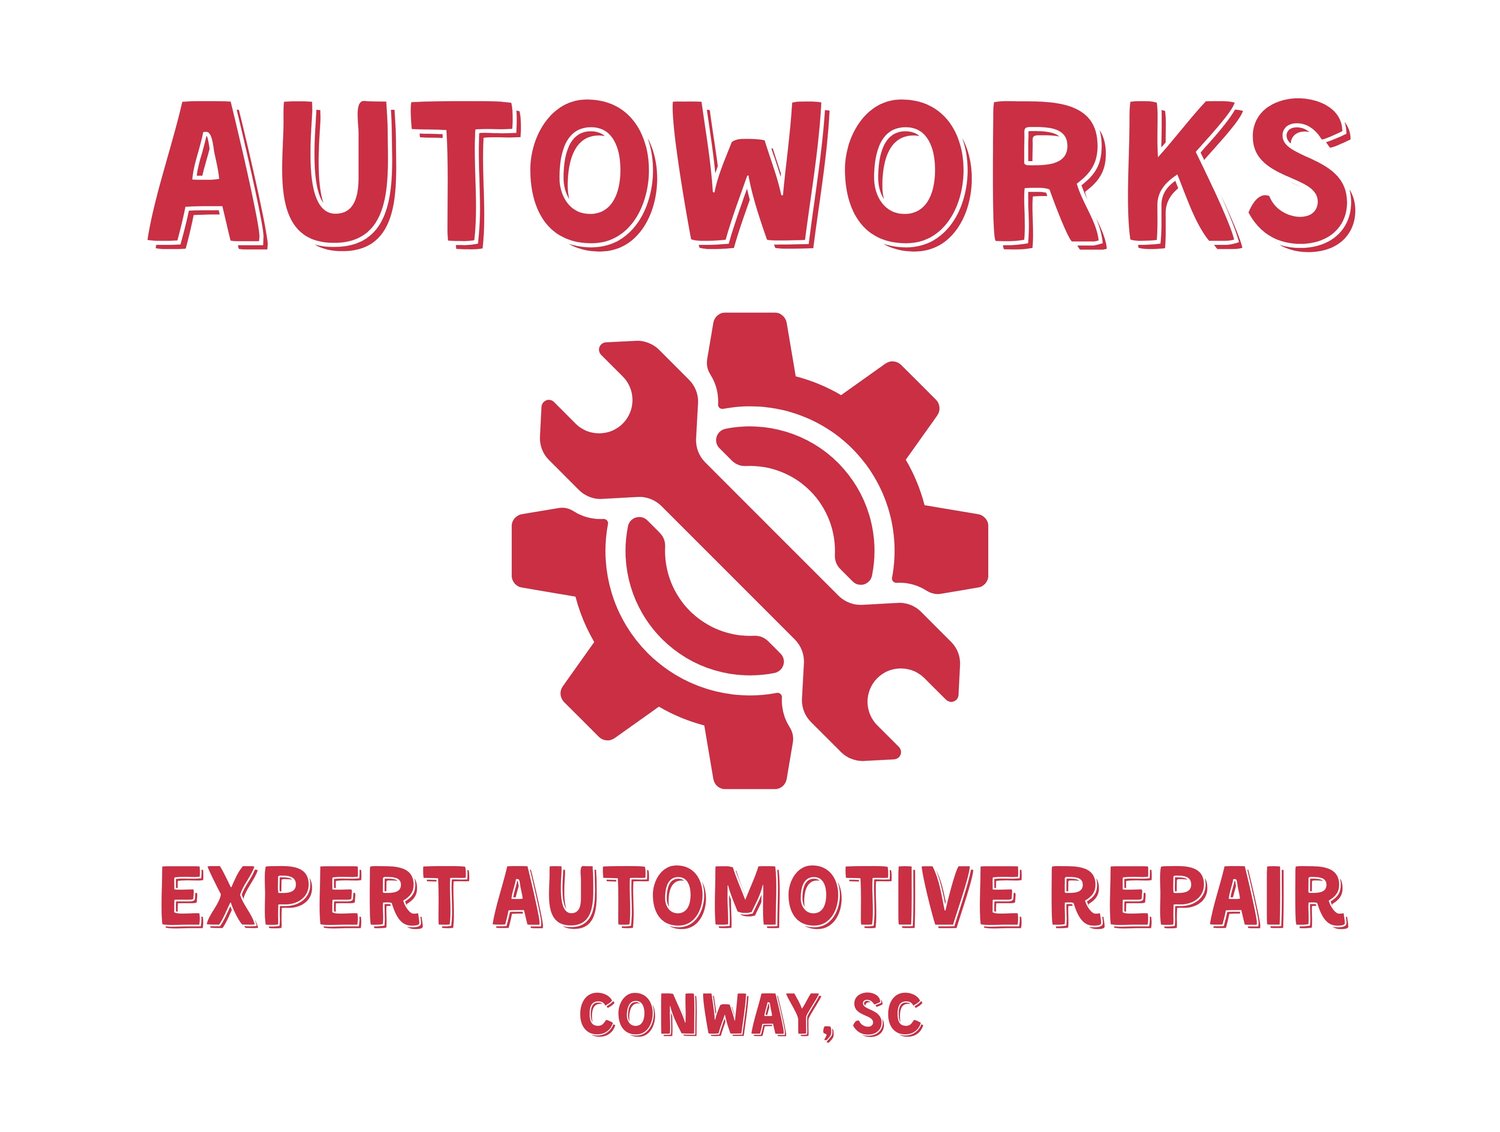 Welcome to Autoworks